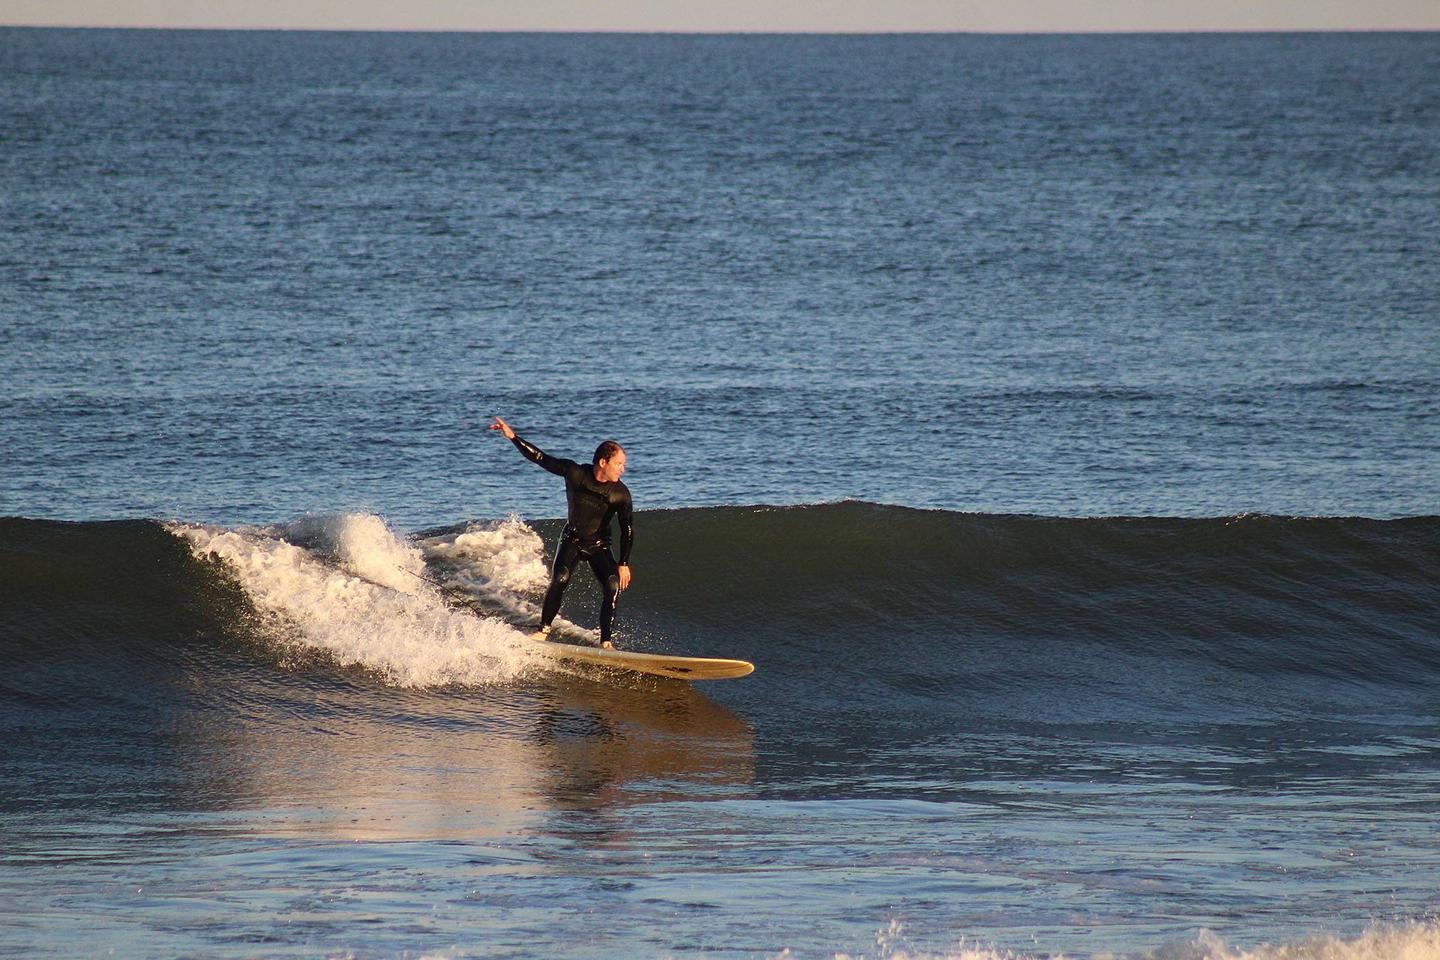 Male surfing a wave on a surfboard at Beach Area C



Surfing at Beach C

Credit: NPS Park Ranger Kris Bonello